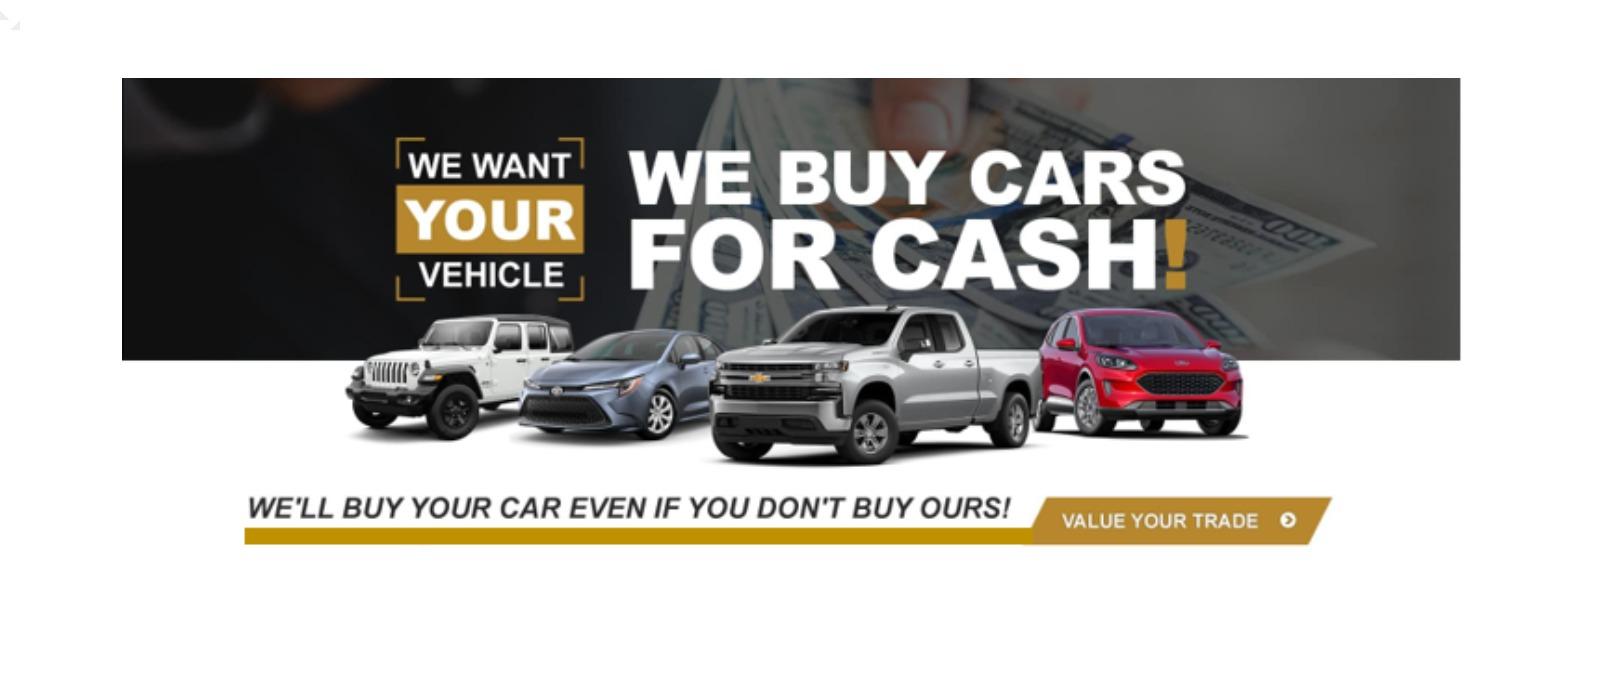 WE BUY CARS FOR CASH! WE'LL BUY YOUR CAR EVEN IF YOU DON'T BUY OURS!